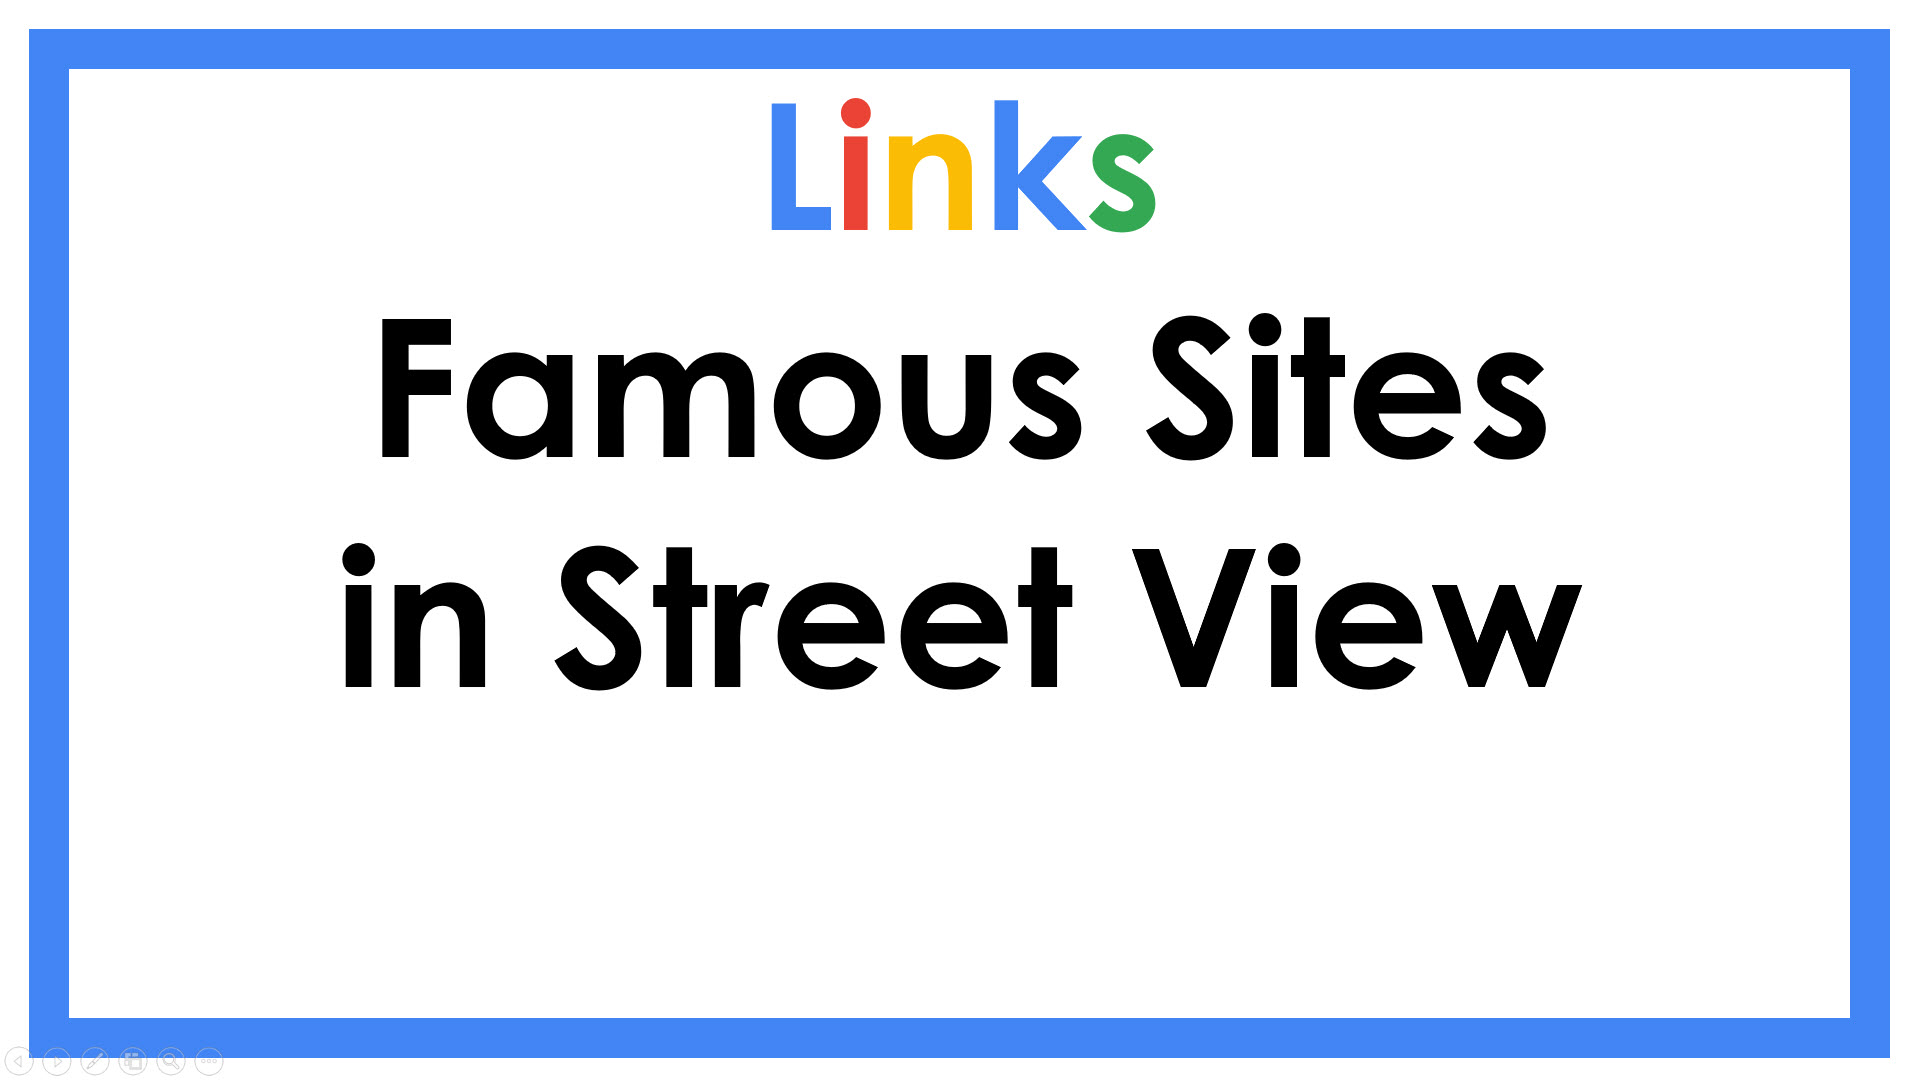 Links Famous Sites in Street View